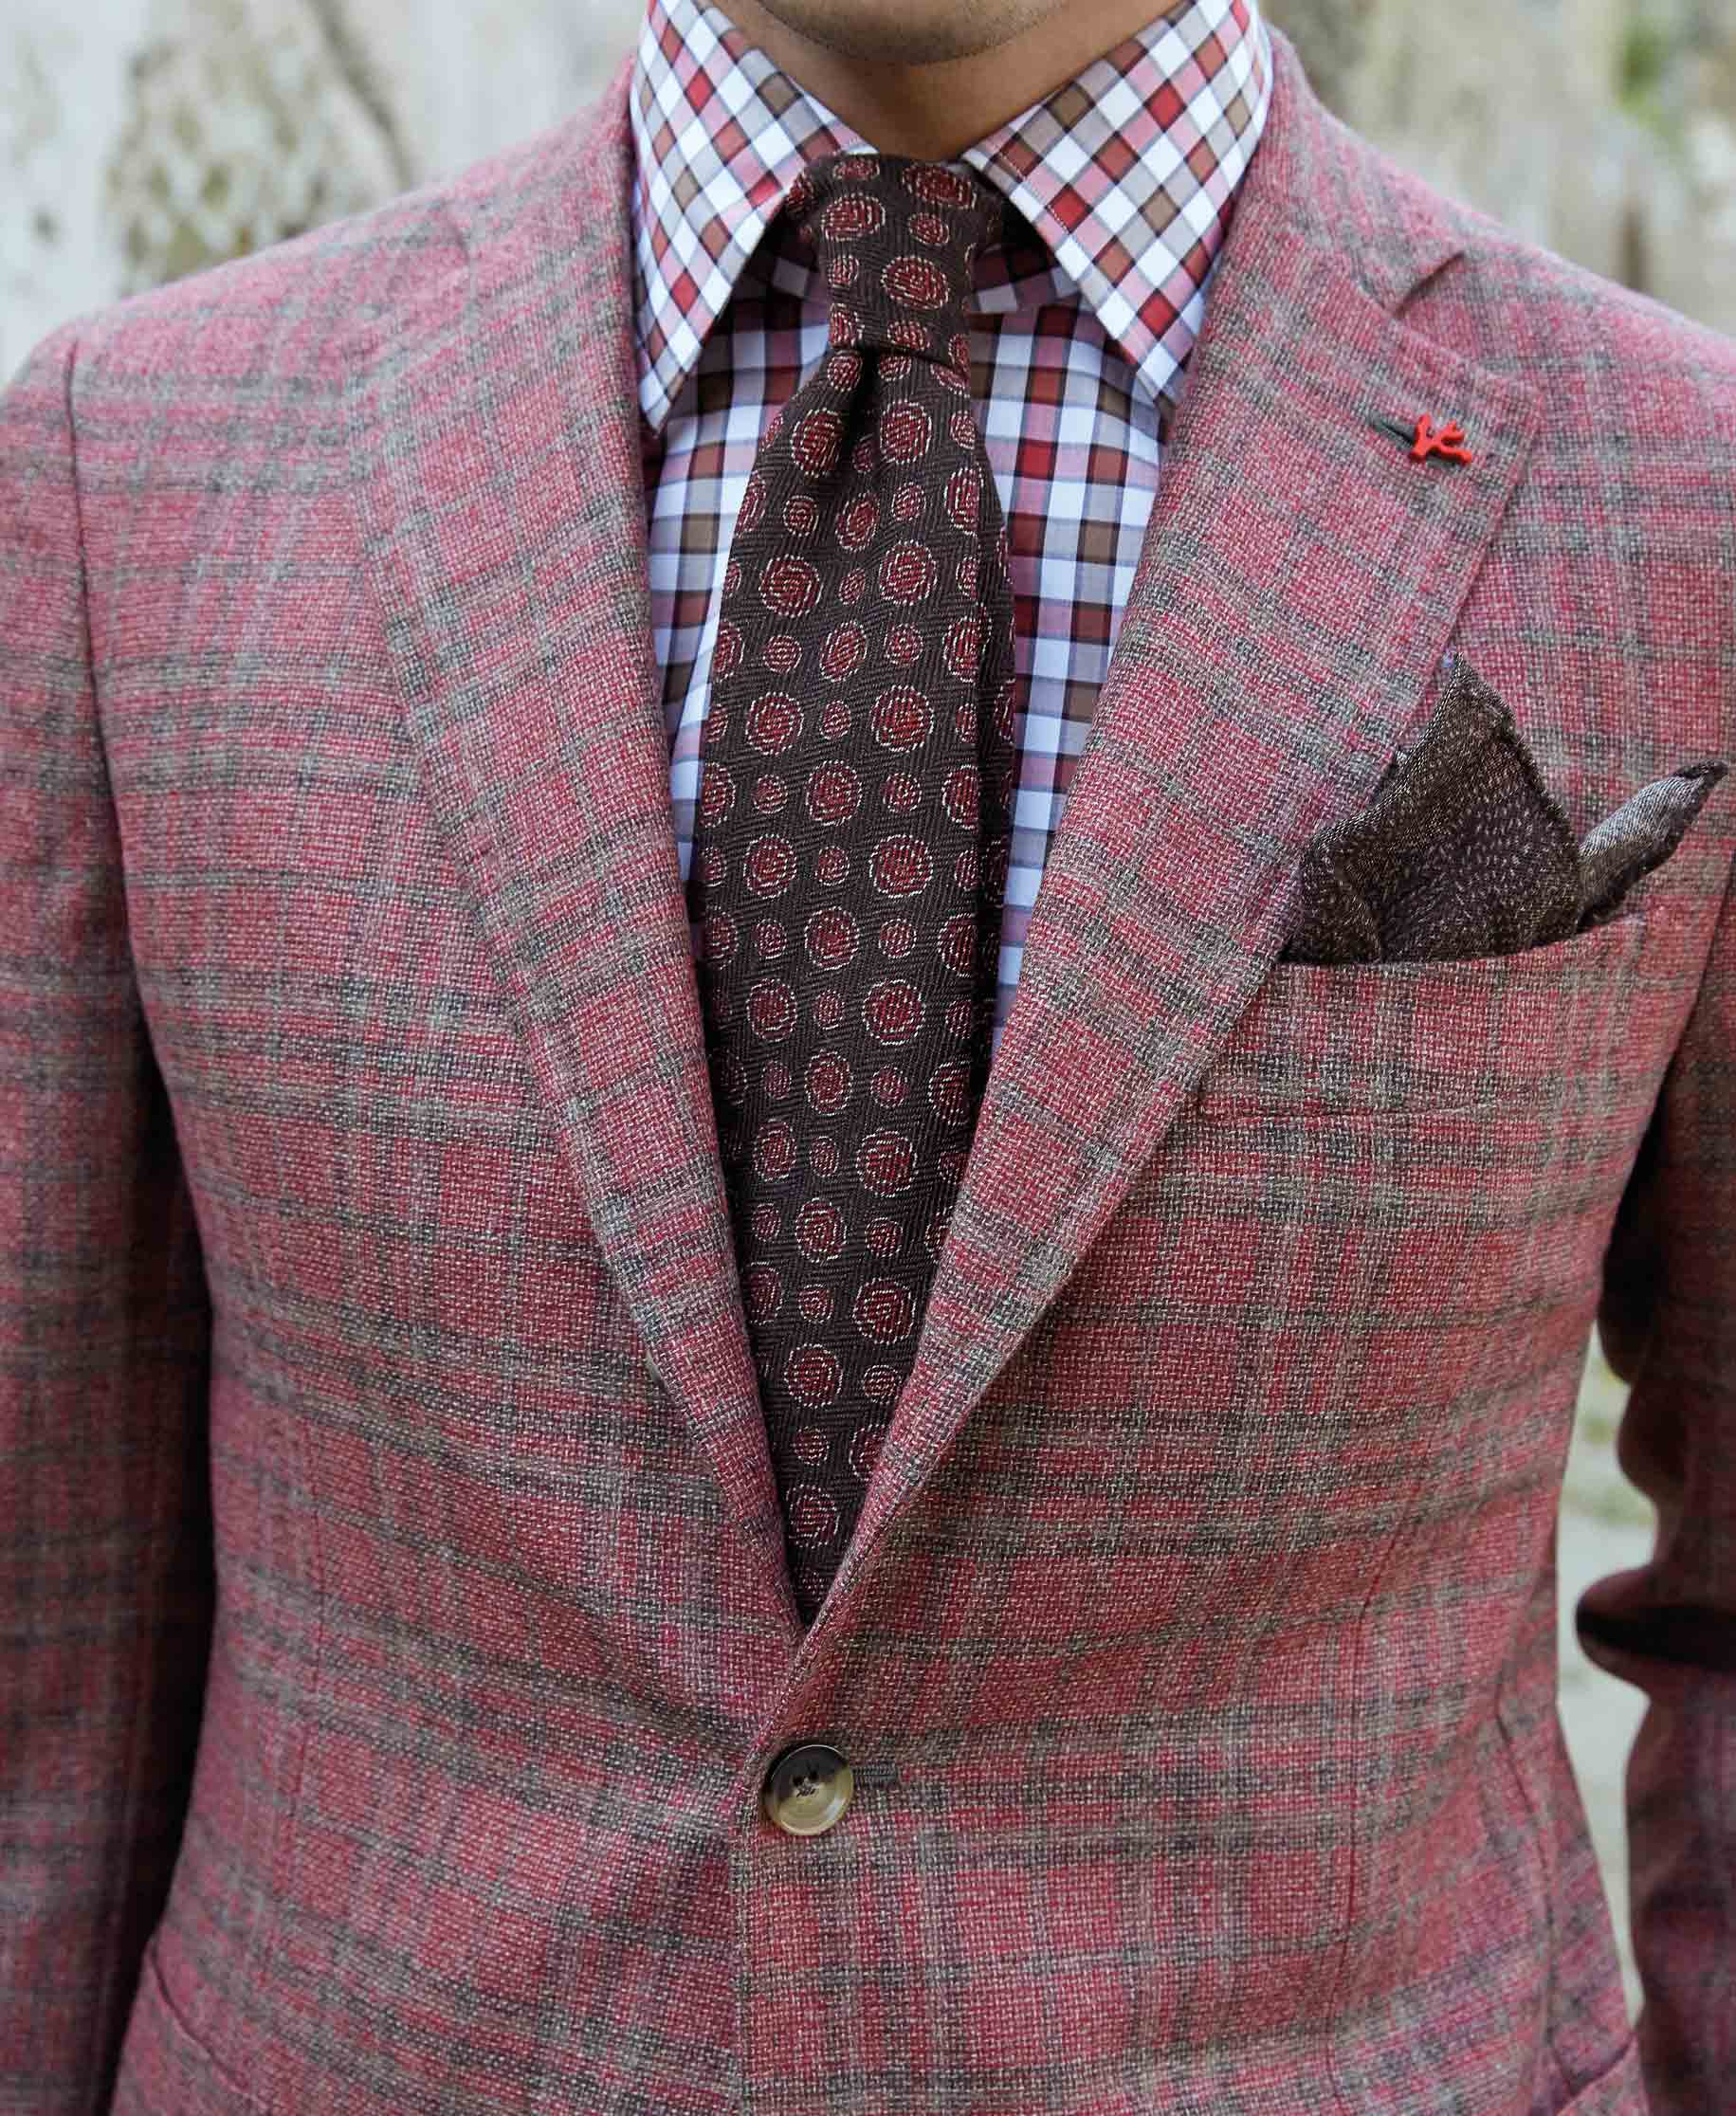 THE OFFICIAL ISAIA NAPOLI THREAD